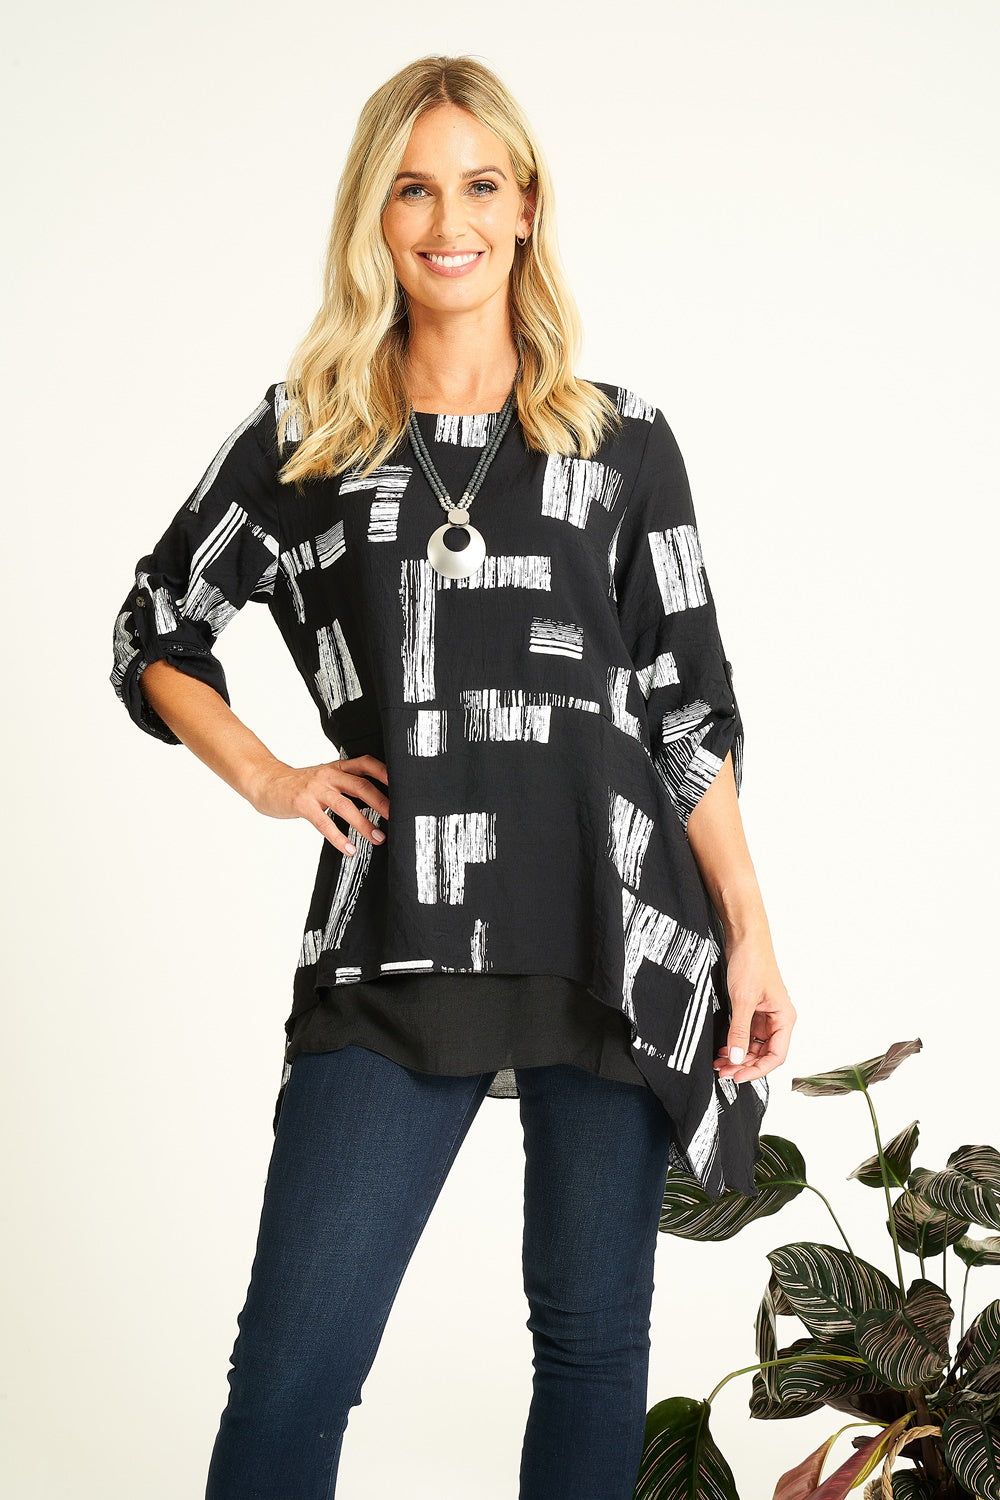 Saloos Unique Blend Of Style & Comfort Tunic with Necklace